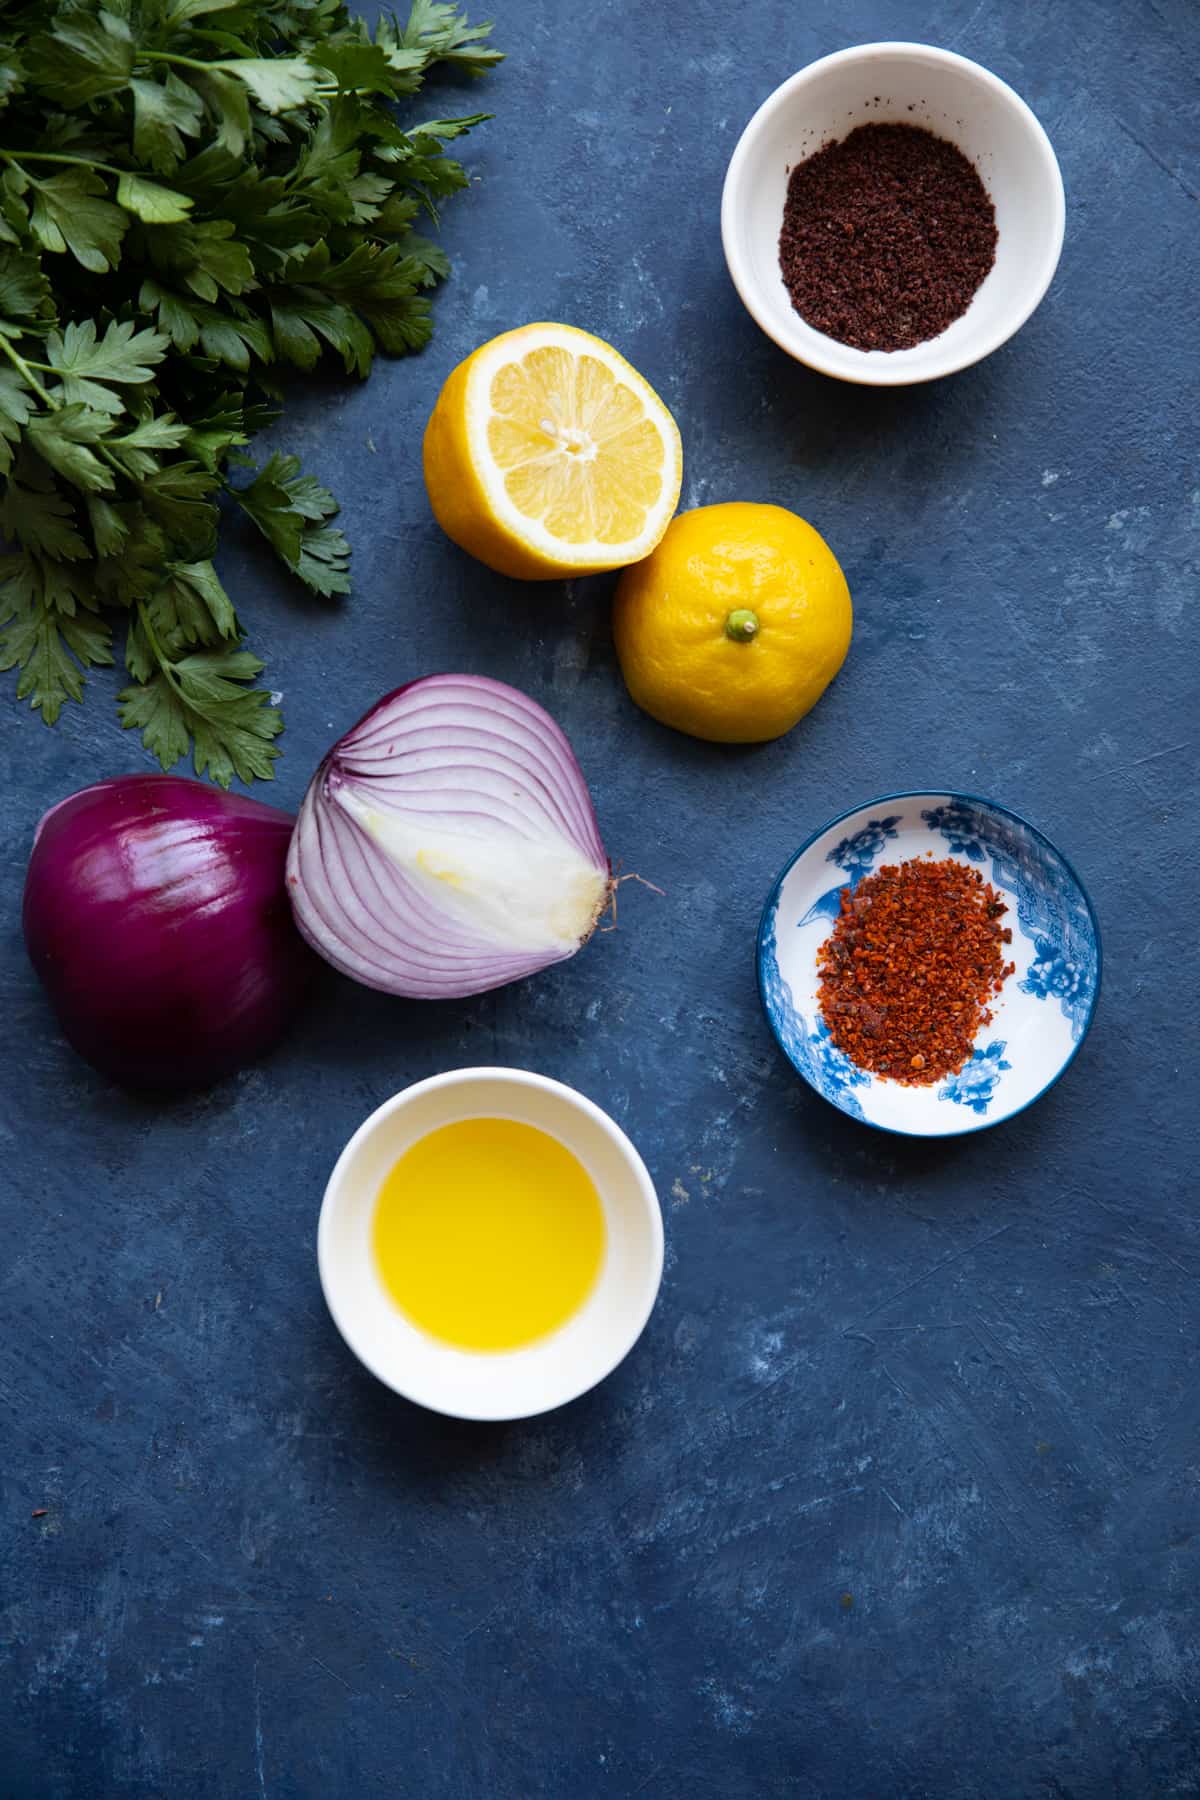 To make Turkish onion and sumac, you need red onion, olive oil, sumac, lemon, parsley and aleppo pepper. 